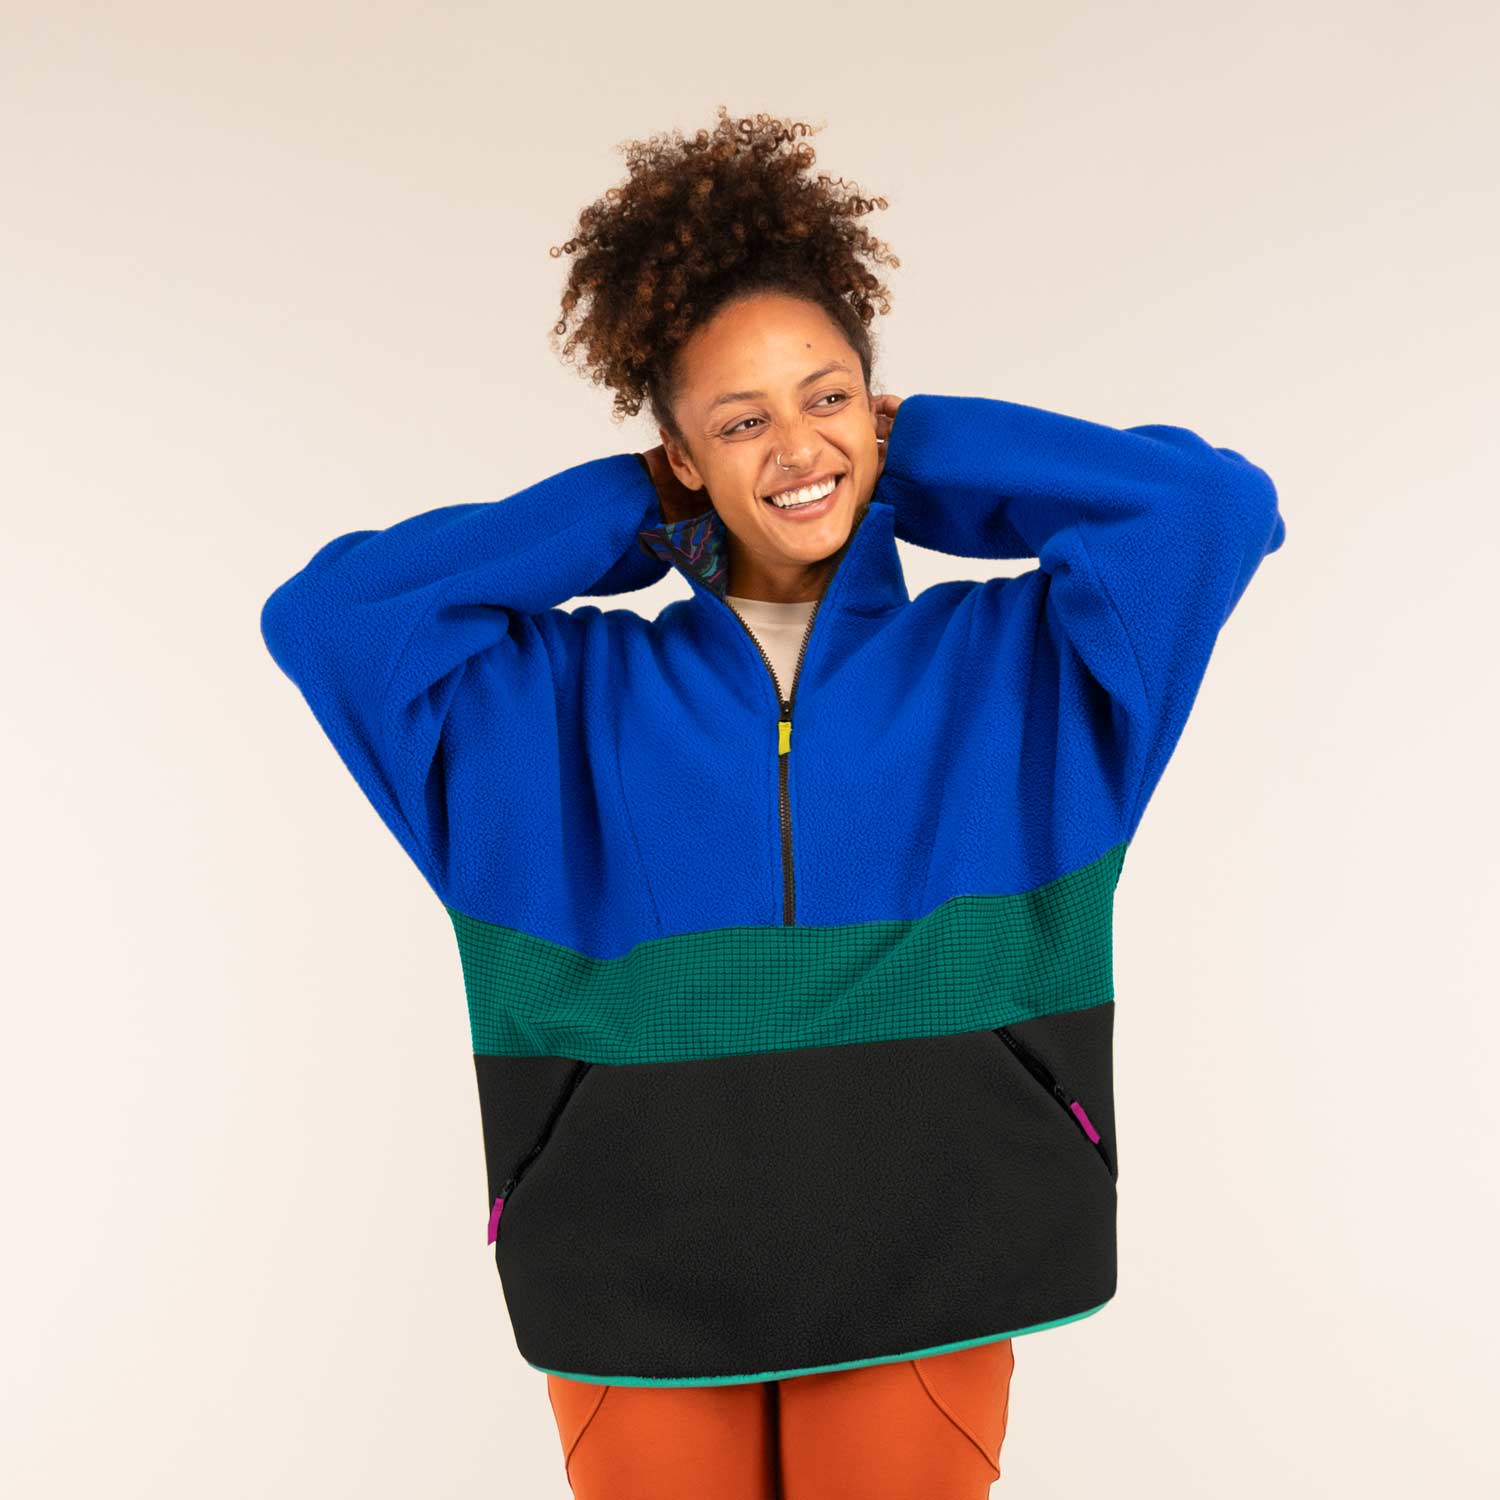 ALEX | Unisex Half Zip Fleece | 3RD ROCK Clothing - 3RD ROCK Alex Retro Fit oversized fleece - Kendal is 5ft 7" with a 36" chest, 28" waist, 38" hips measuring S-M on the size chart. Here she wears a size L for a more oversized fit. F